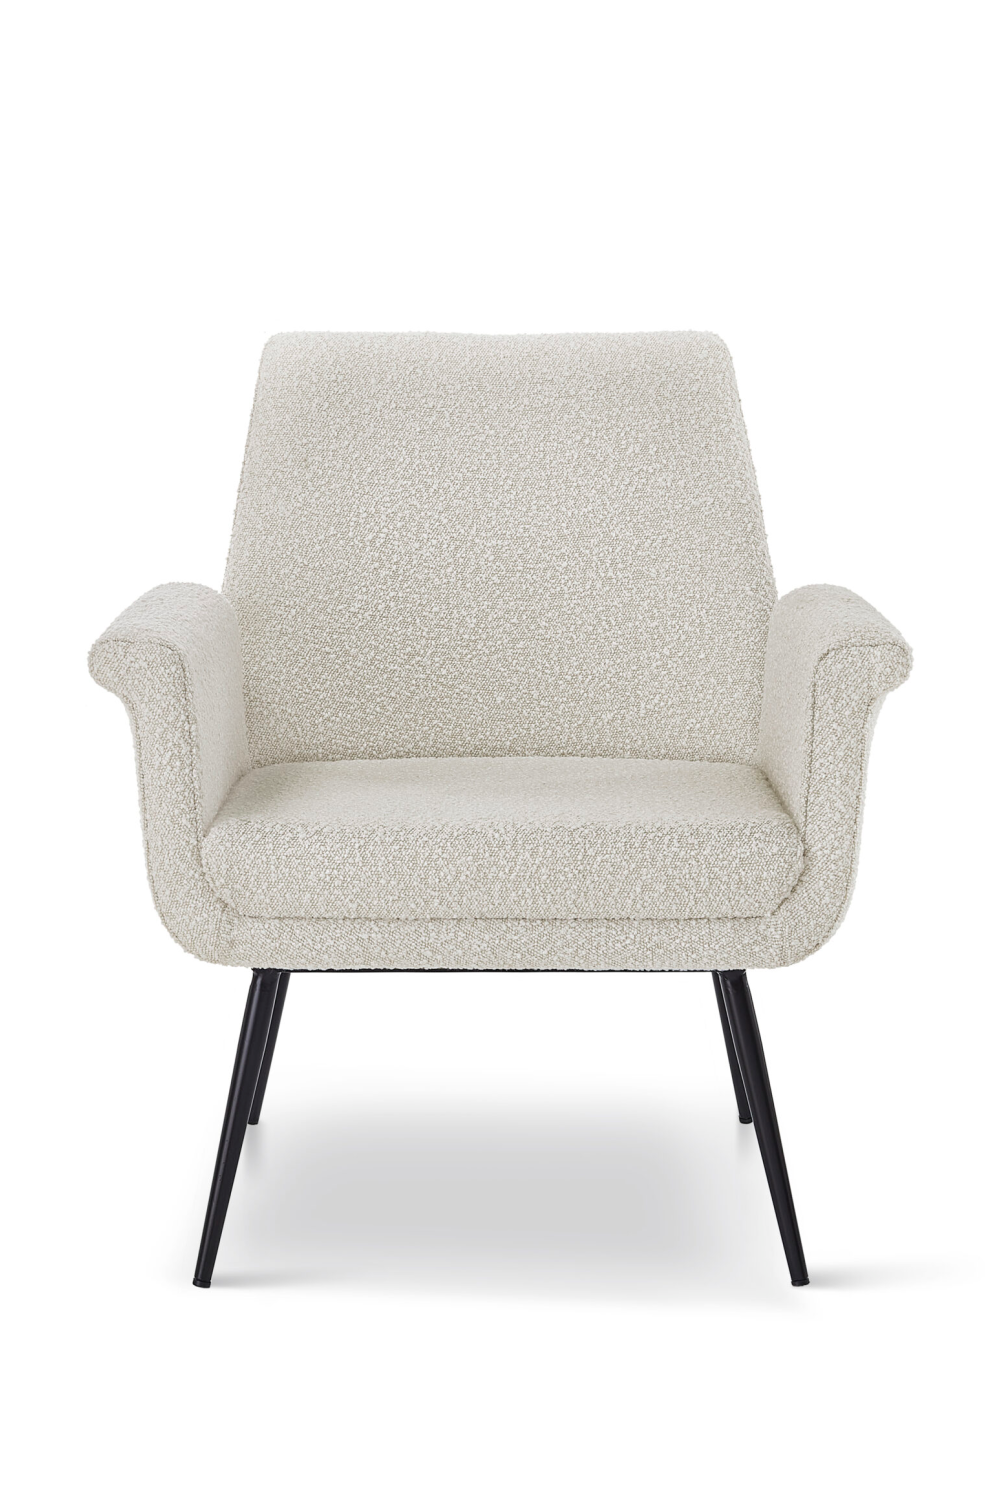 Classic Boucle Occasional Chair | Liang & Eimil Fiore | OROA.com